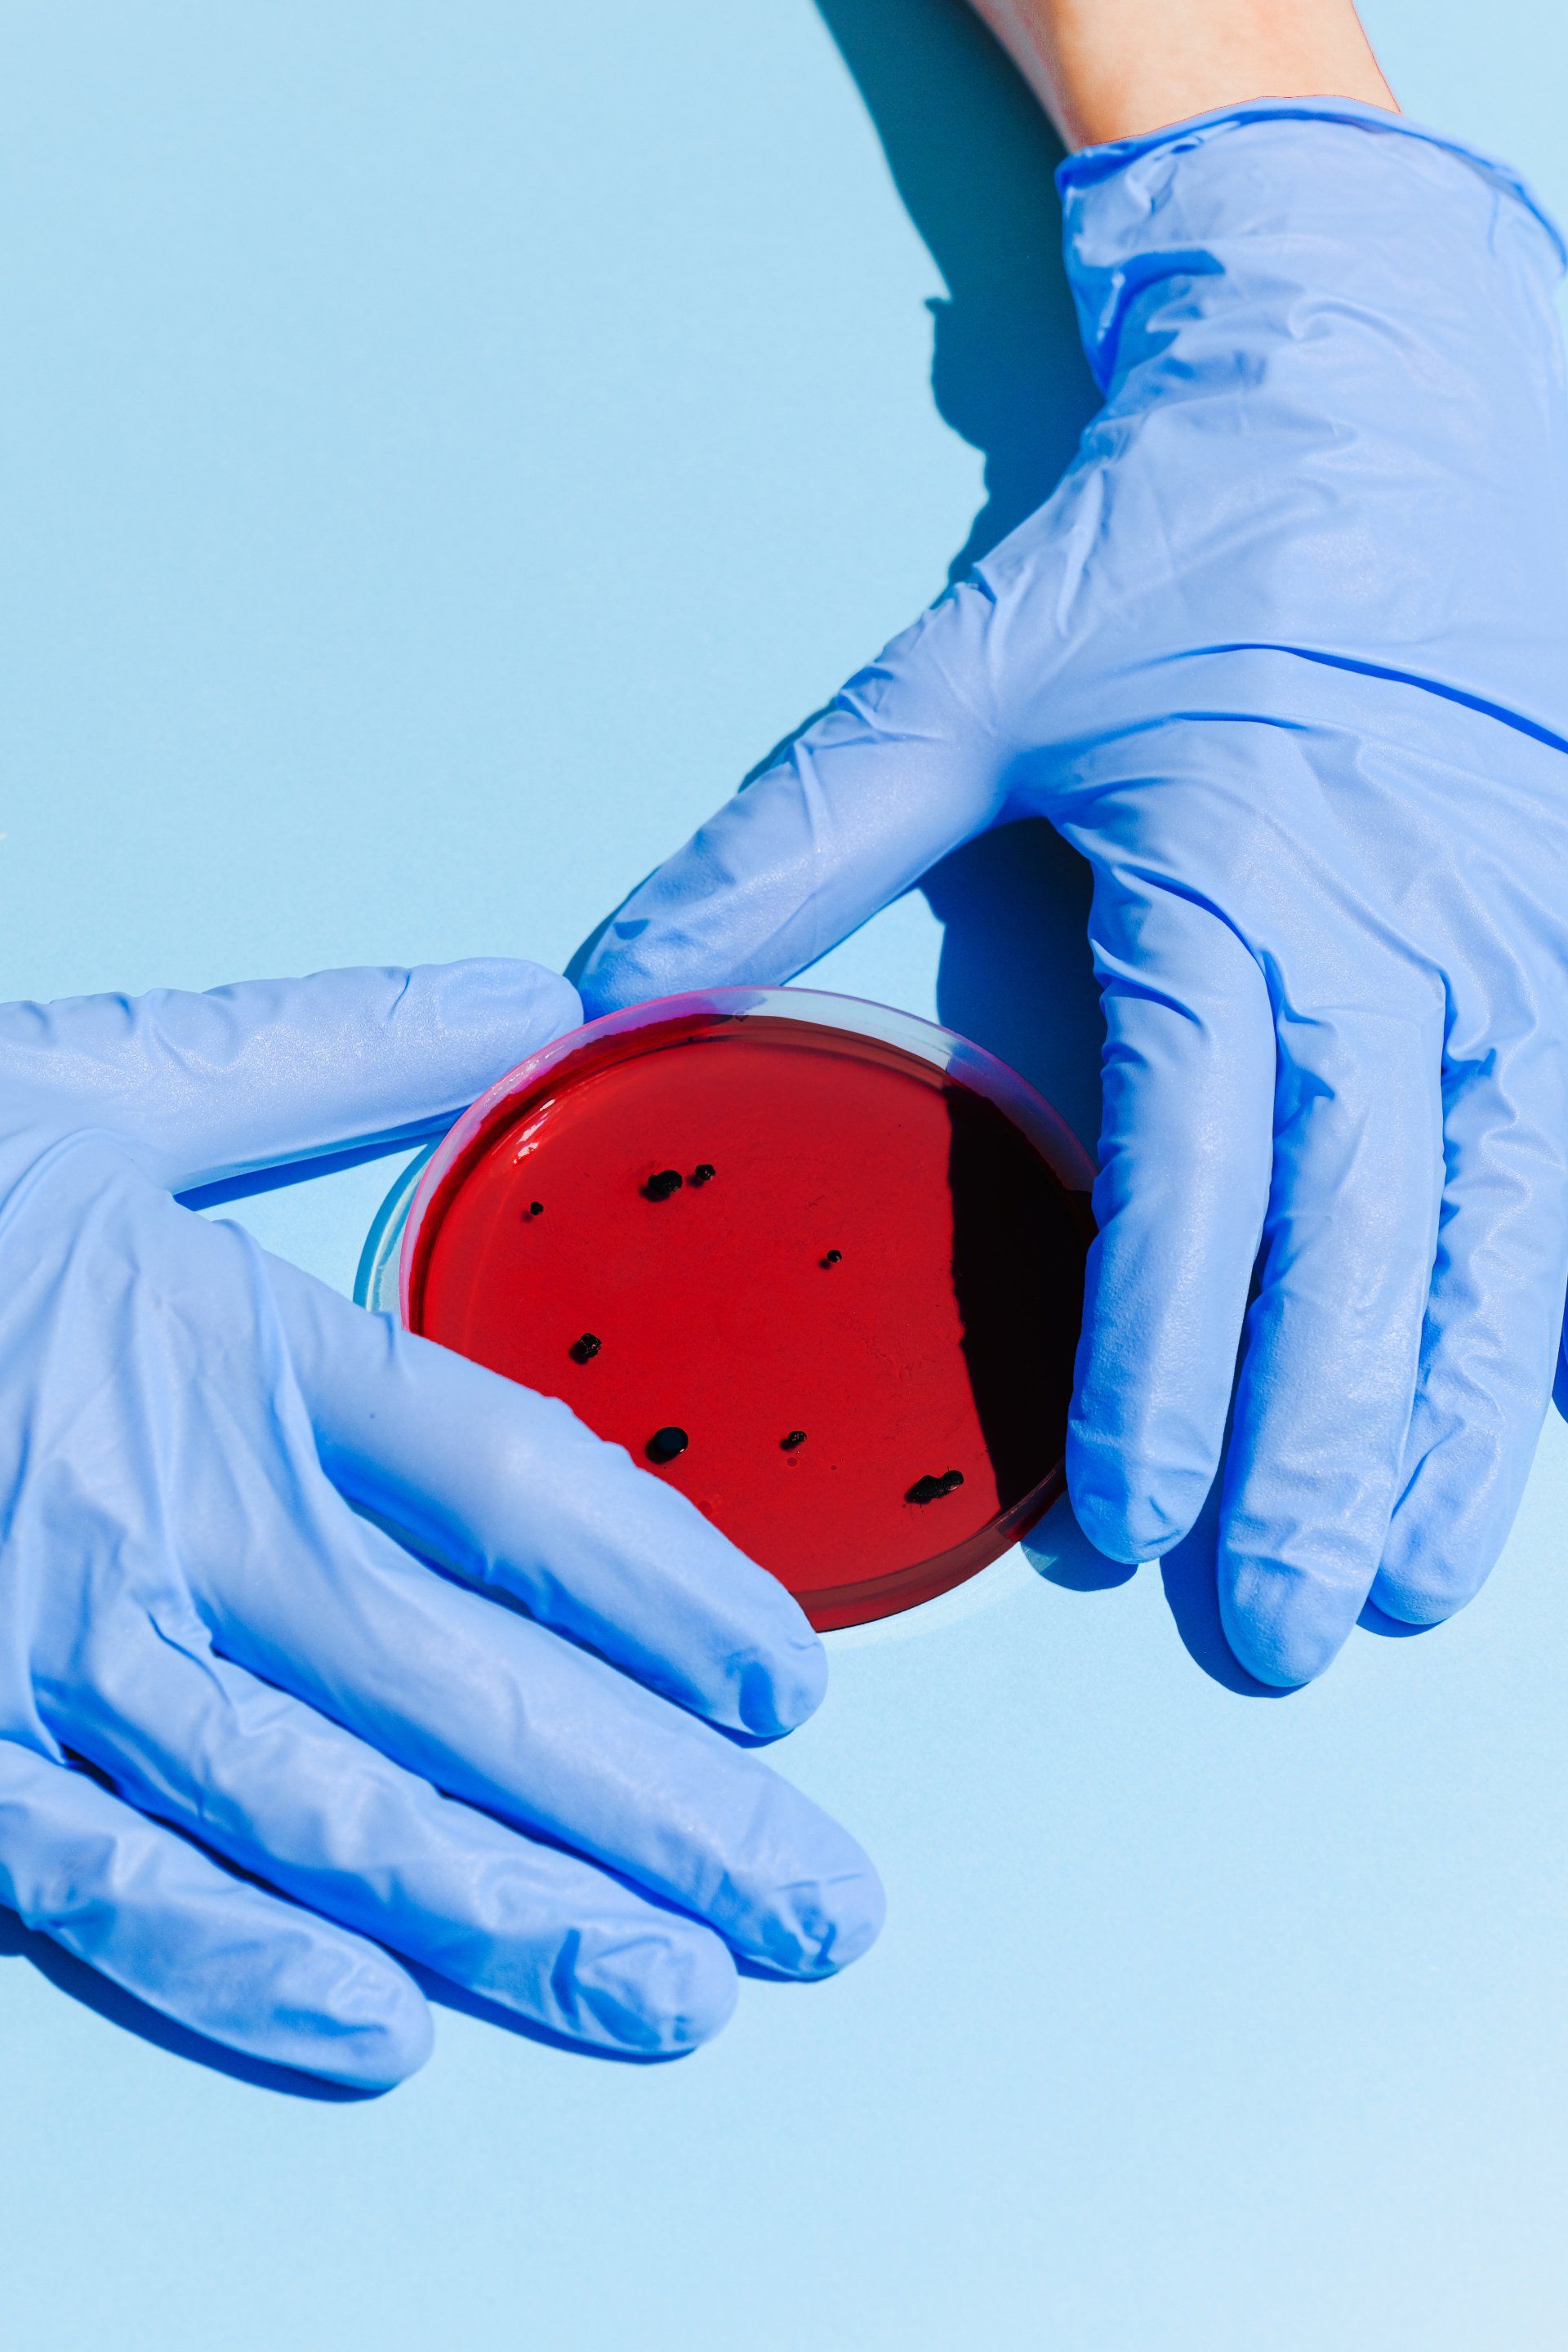 A person wearing blue gloves is holding a petri dish with red liquid in it.